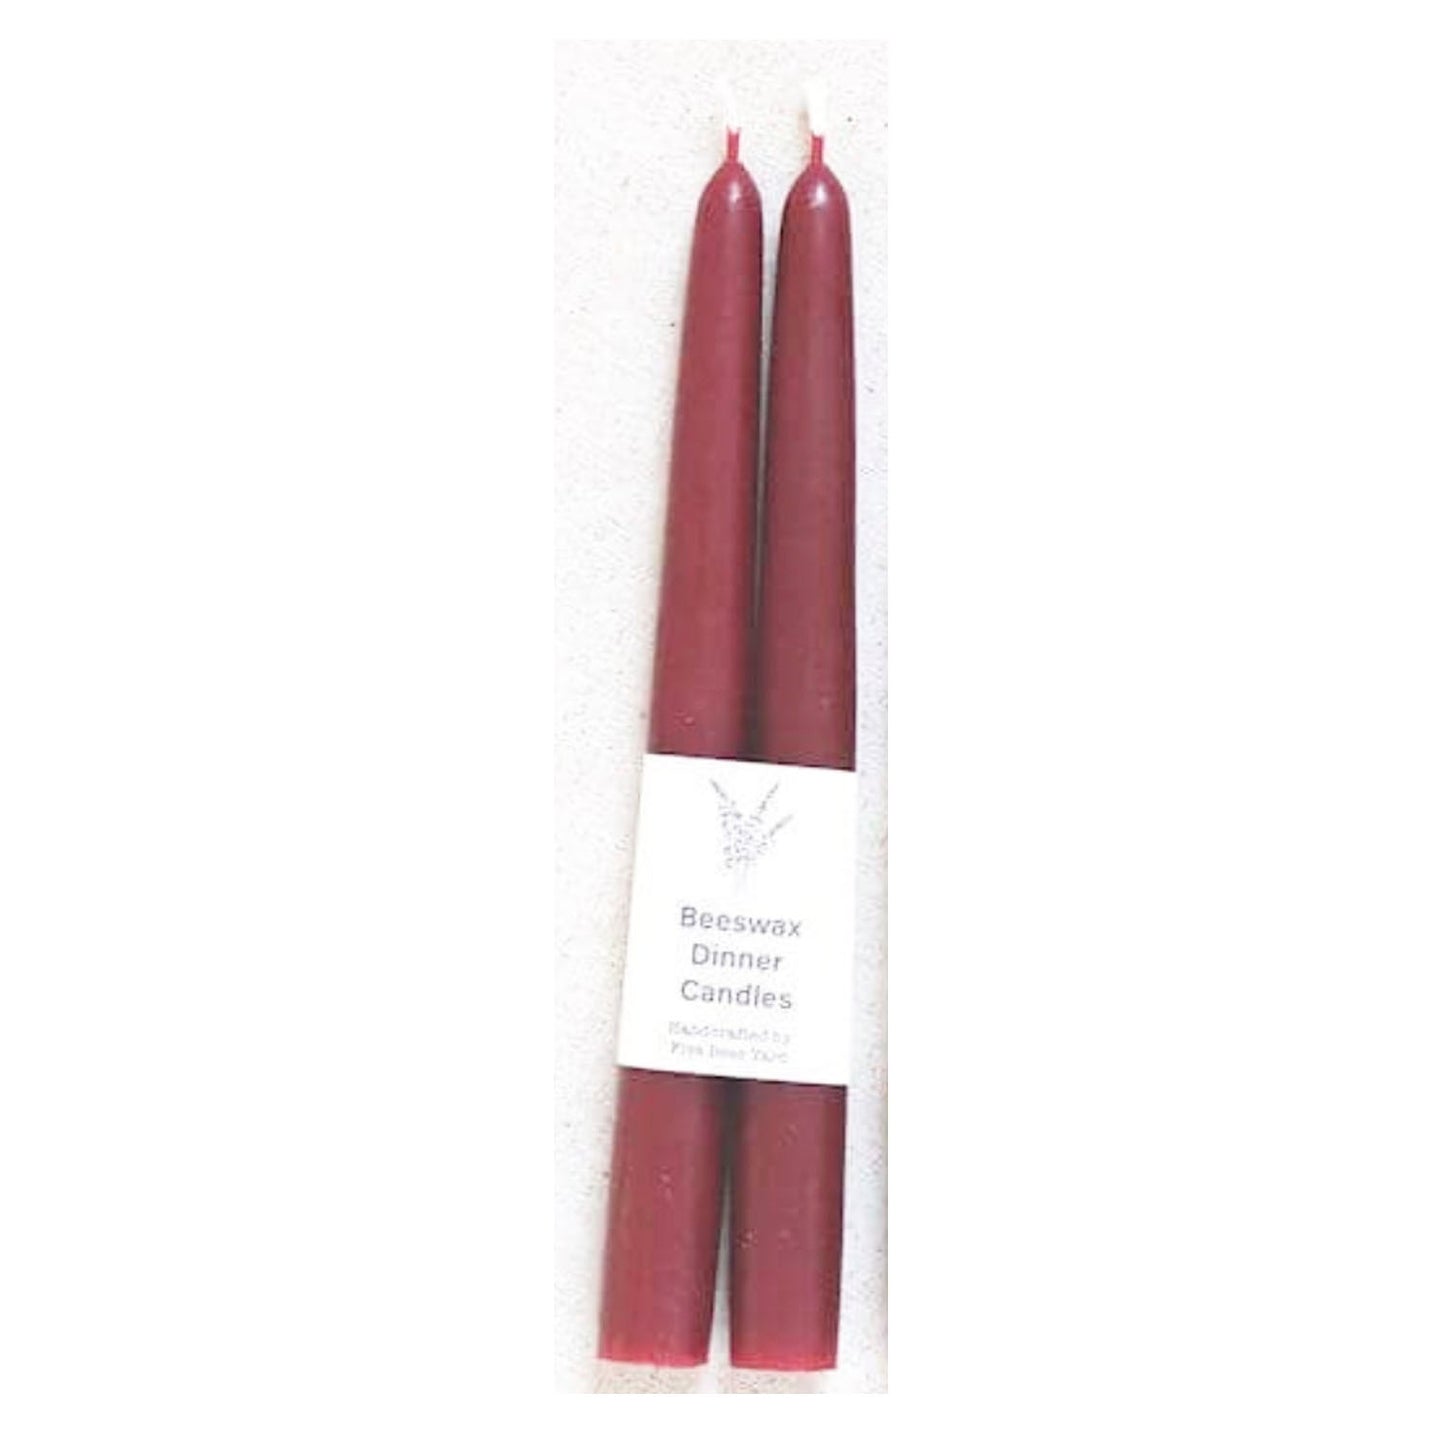 Beeswax Candle Burgundy Red